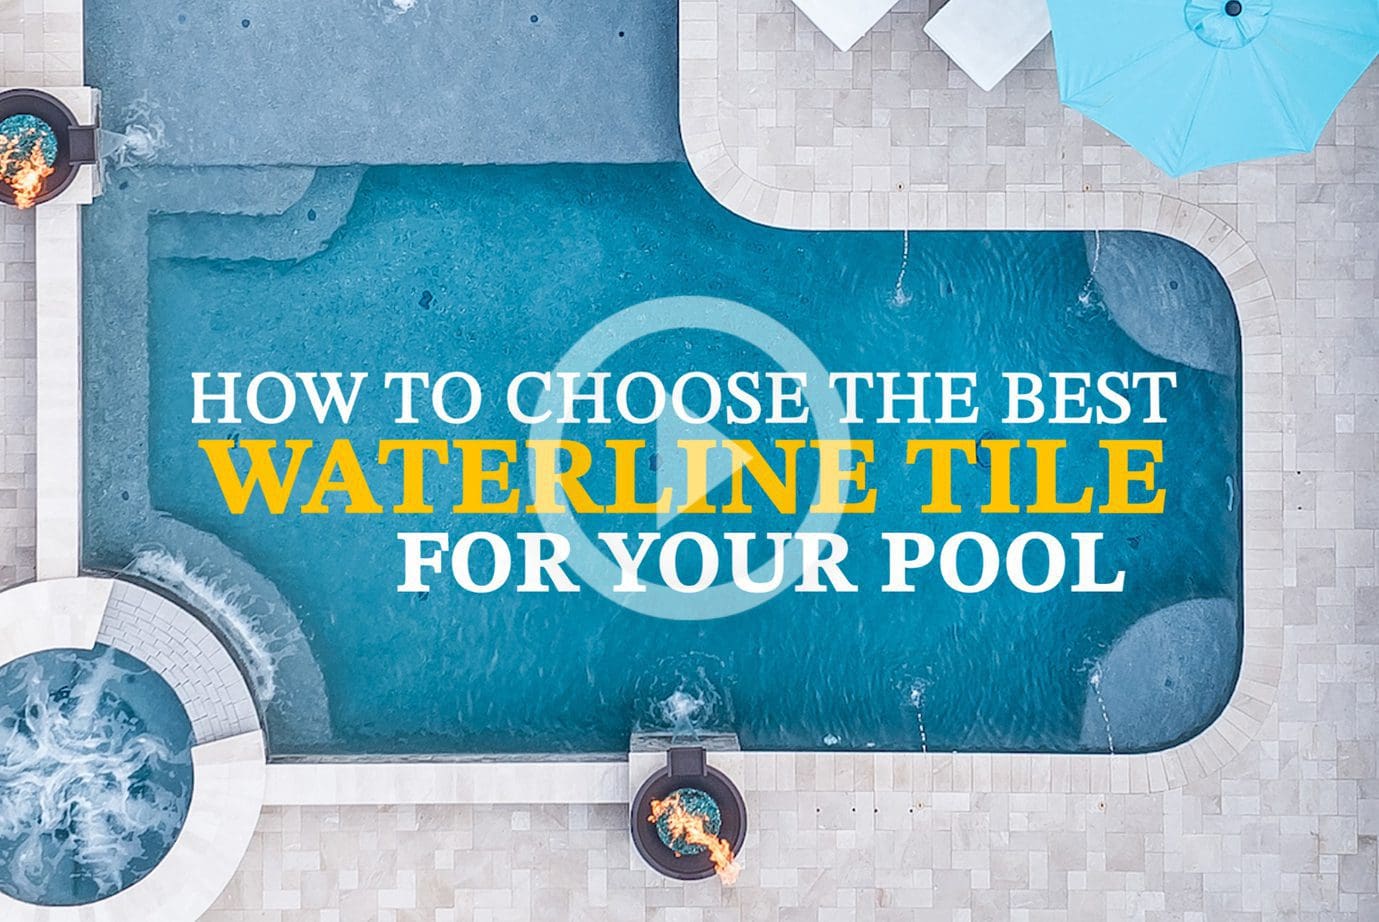 How To Choose The Best Waterline Tile For Your Pool